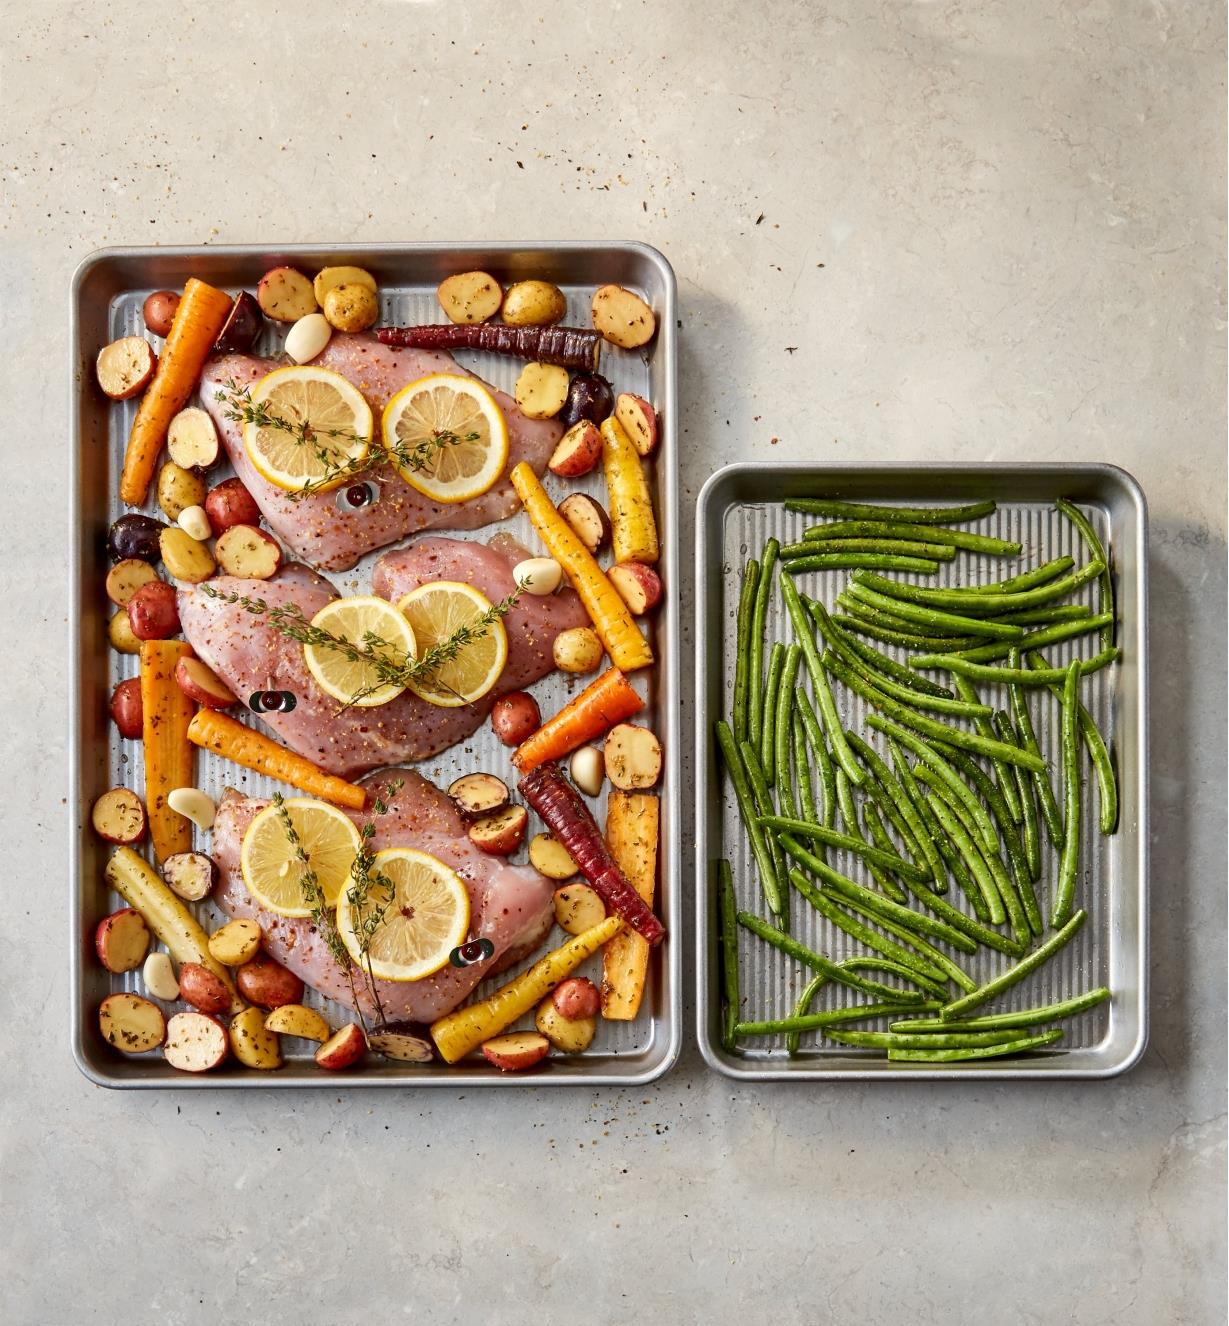 Large baking pan holding salmon and vegetables and small baking pan holding green beans